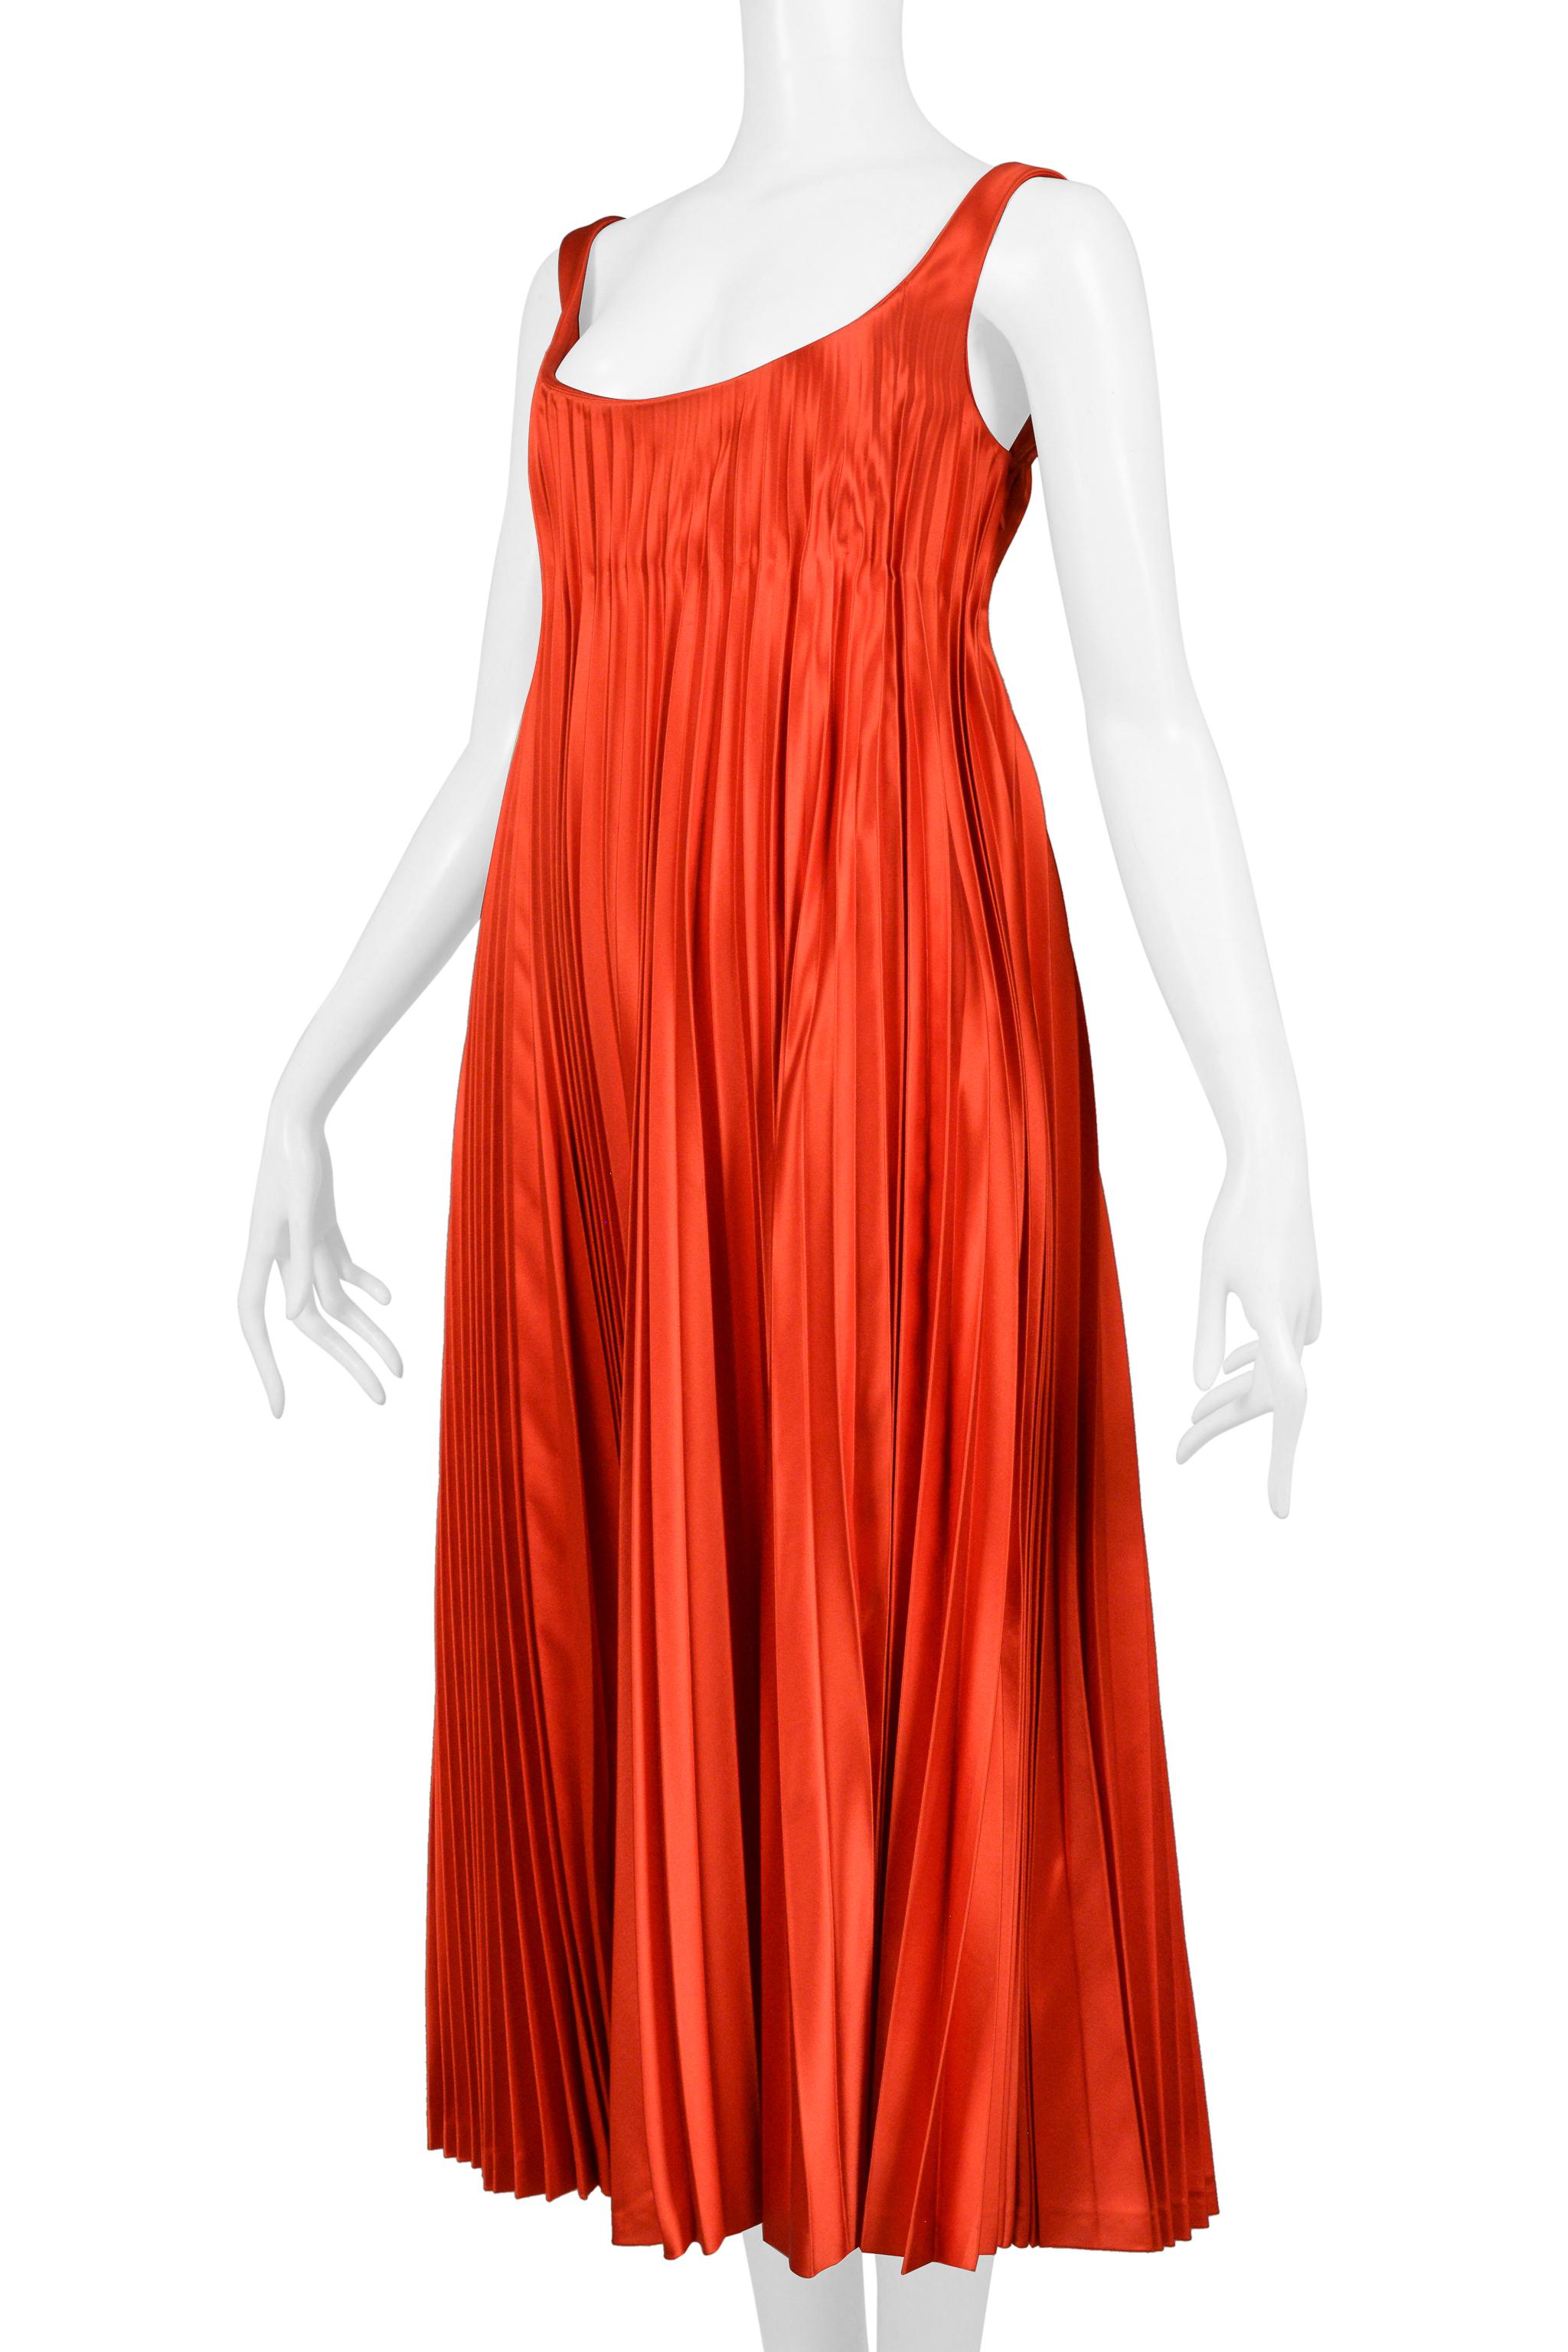 Alexander McQueen Red Satin Pleated Cocktail Dress 2003 For Sale 1